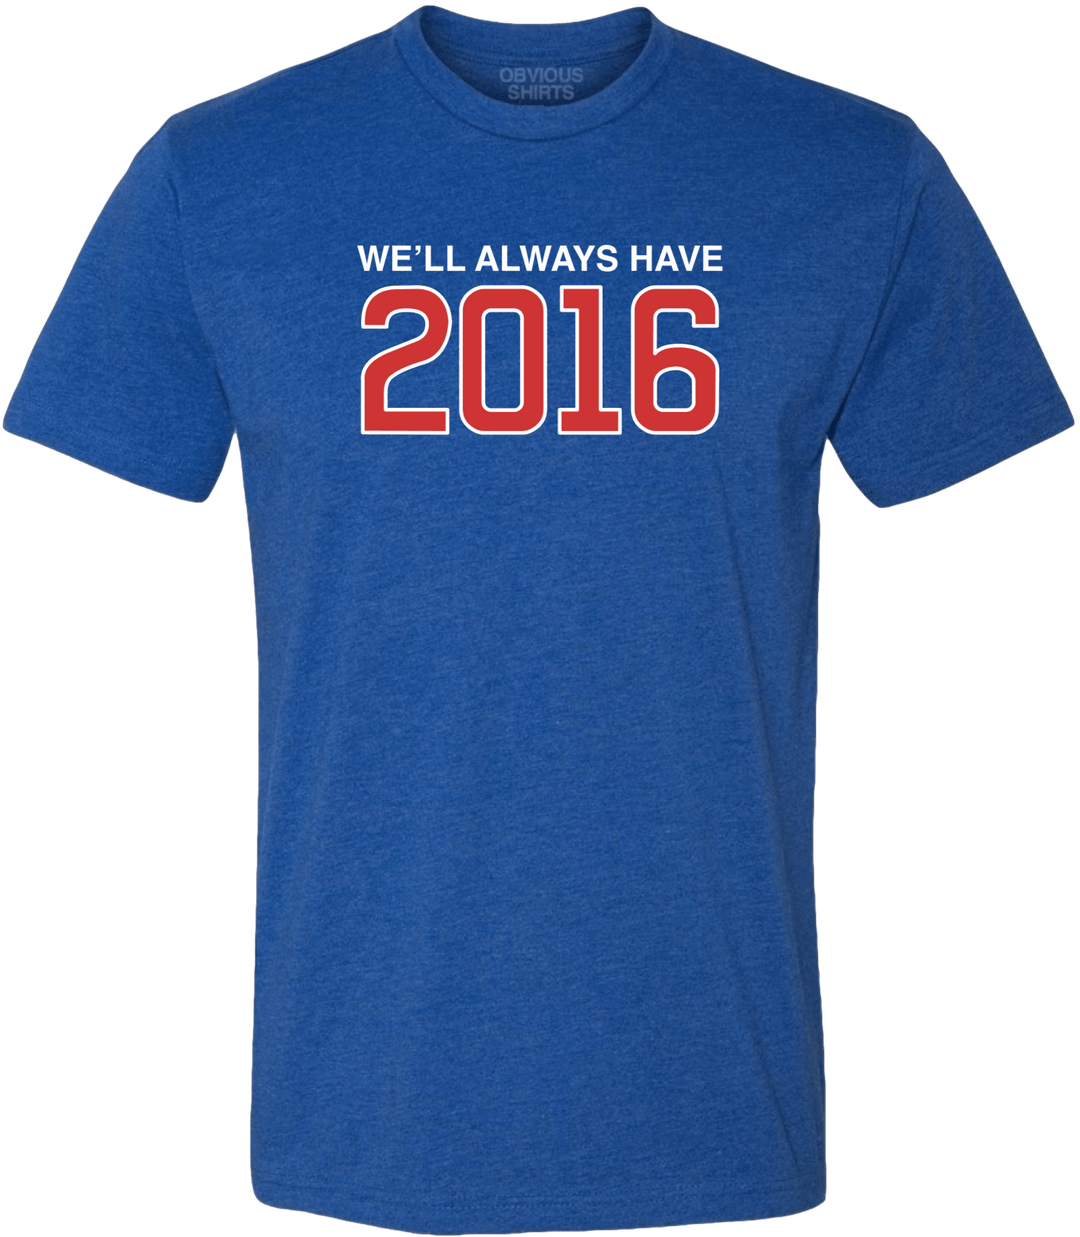 Chicago-based Obvious Shirts emerges as favorite among Cubs fans